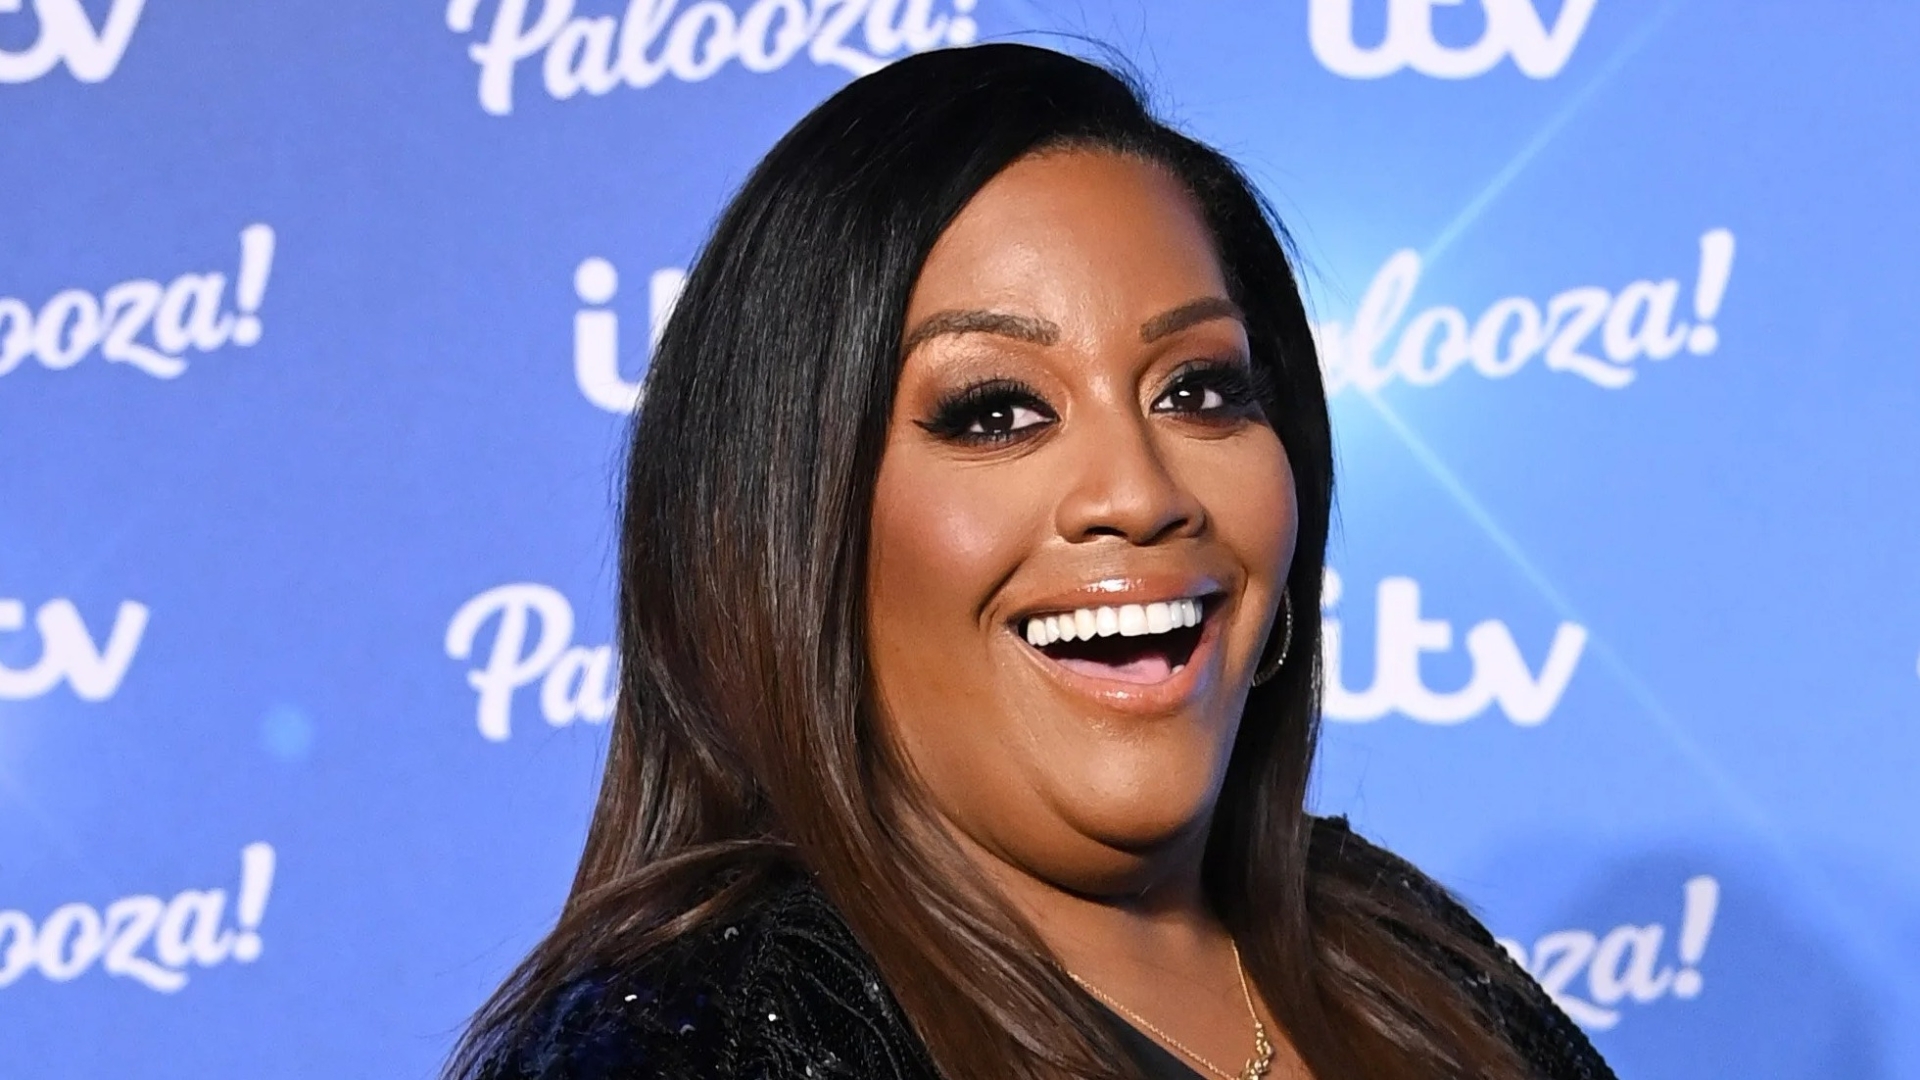 Alison Hammond looks slimmer and more toned in her black sequinned ensemble at ITV Palooza